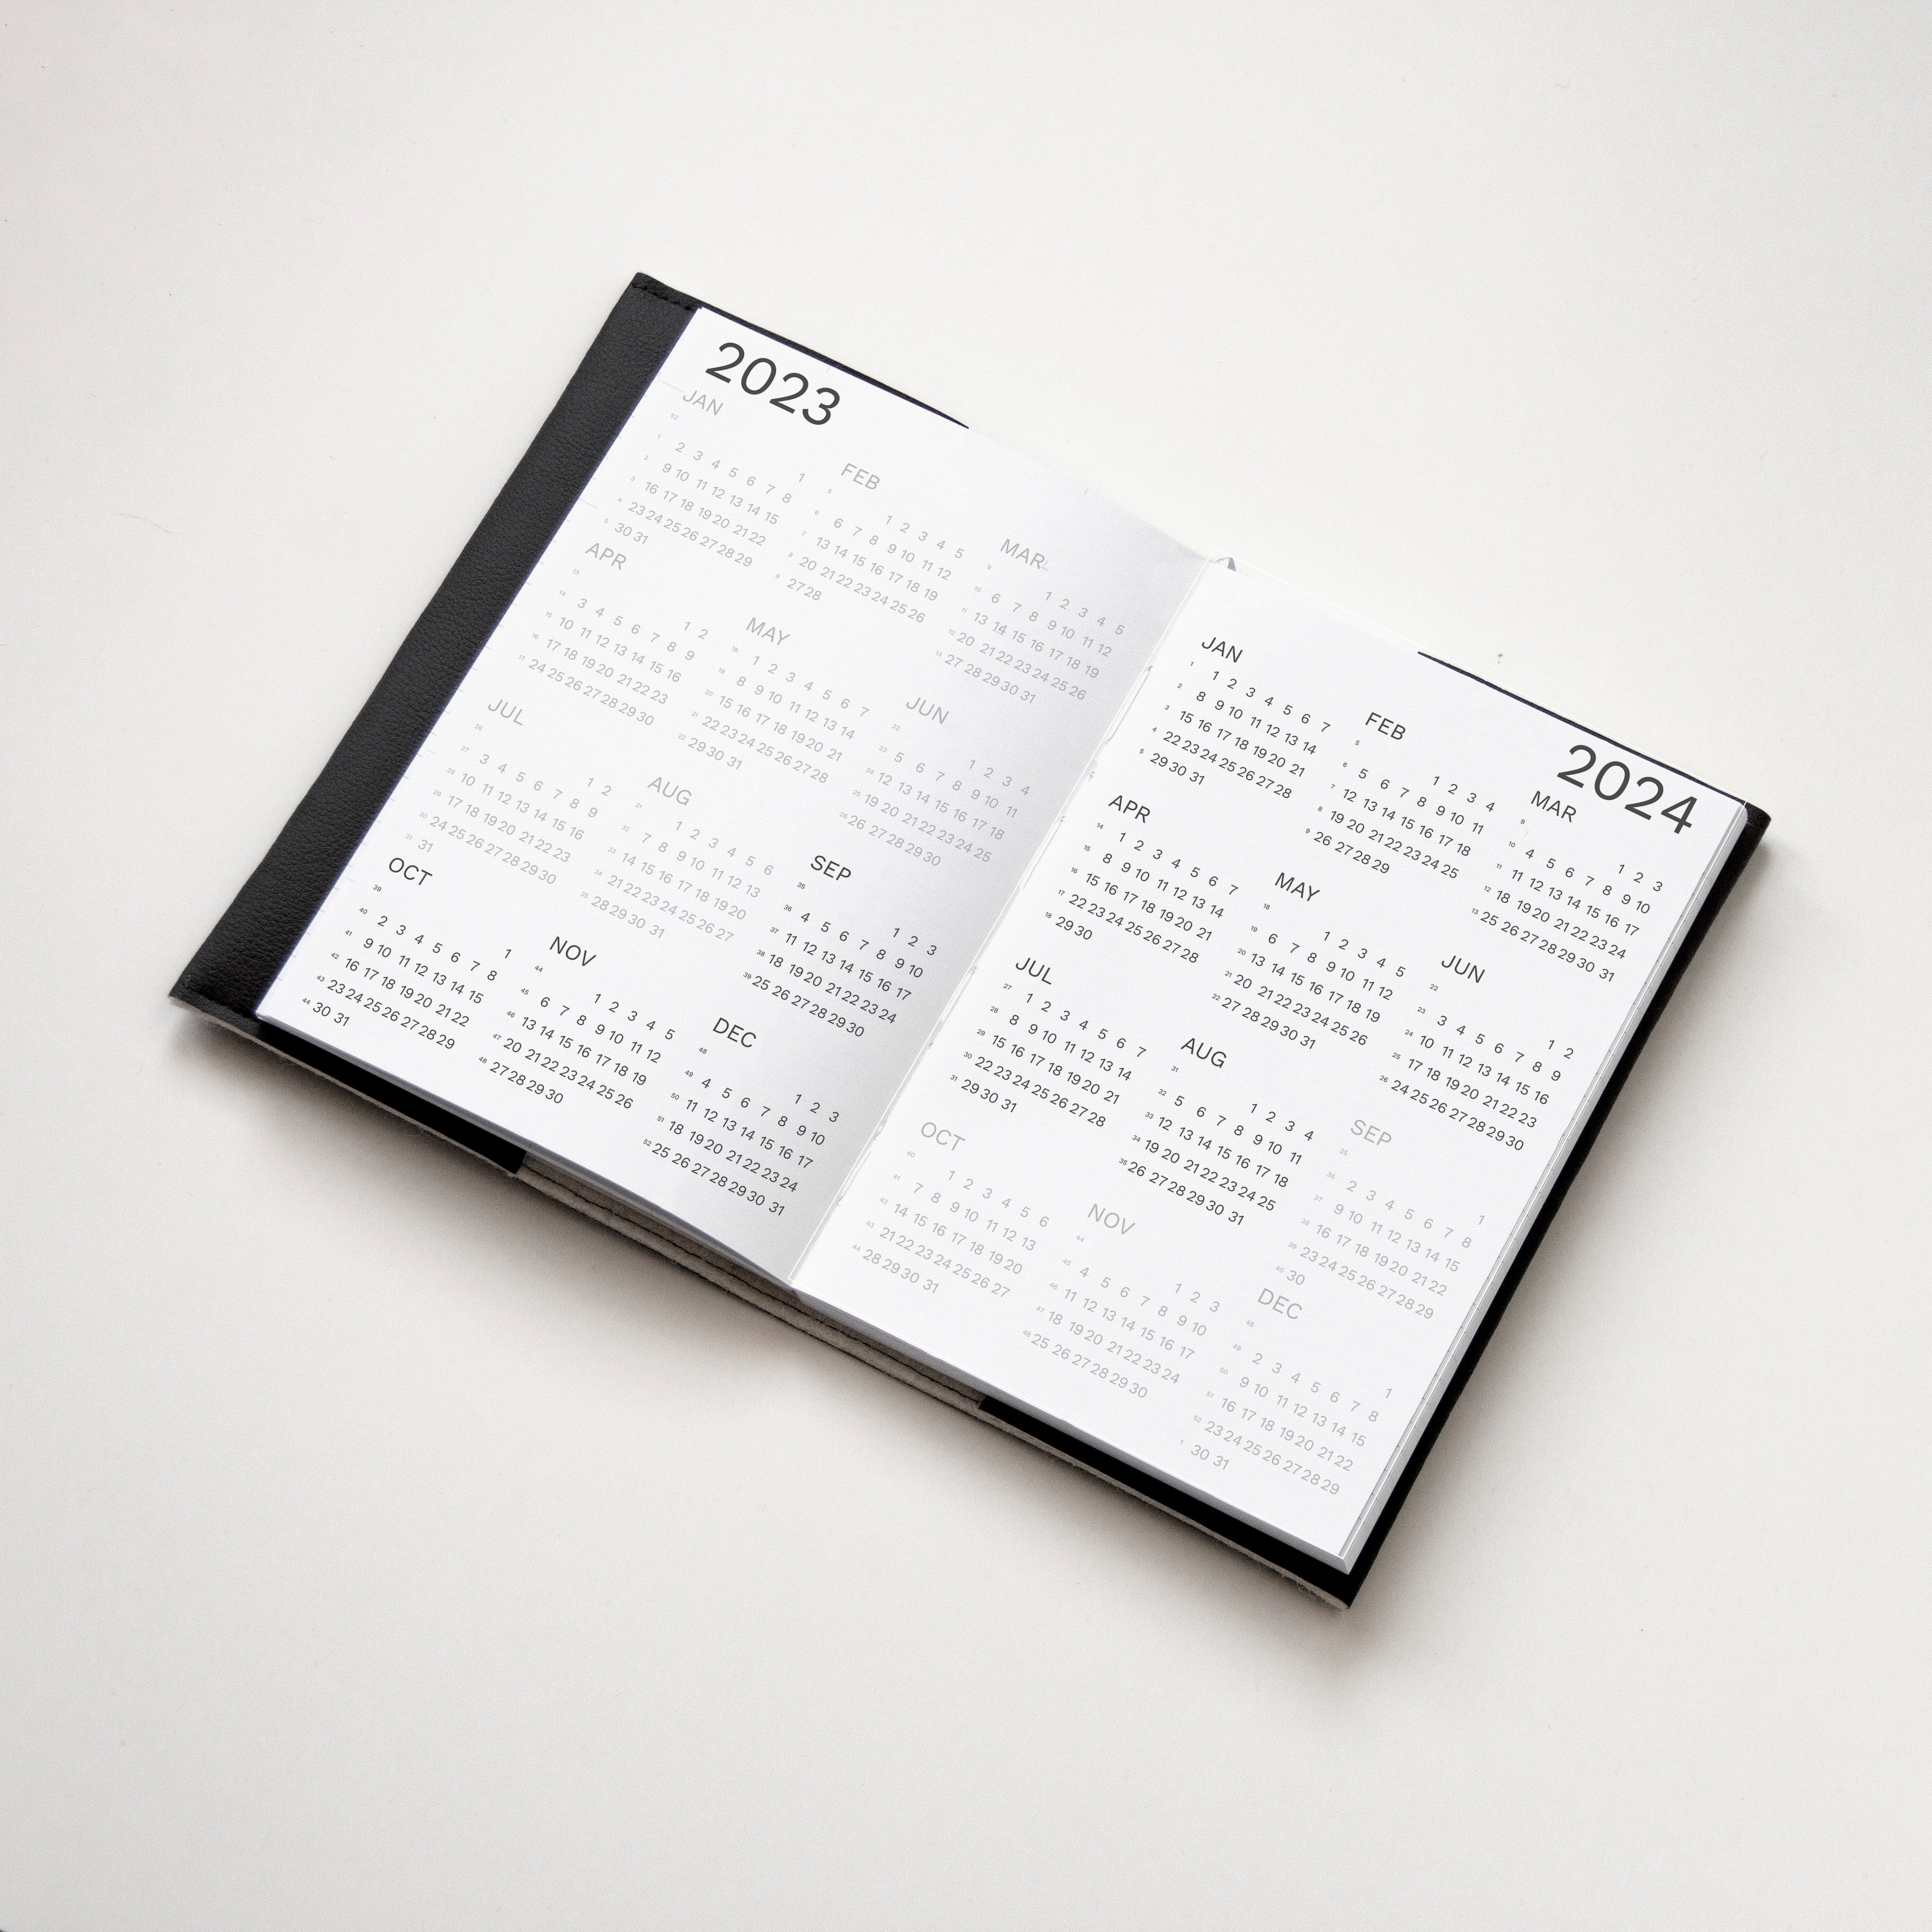 OCTÀGON DESIGN | 2023/2024 PRO Weekly Planner | Vegan leather cover | 2023 and 2024 calendars